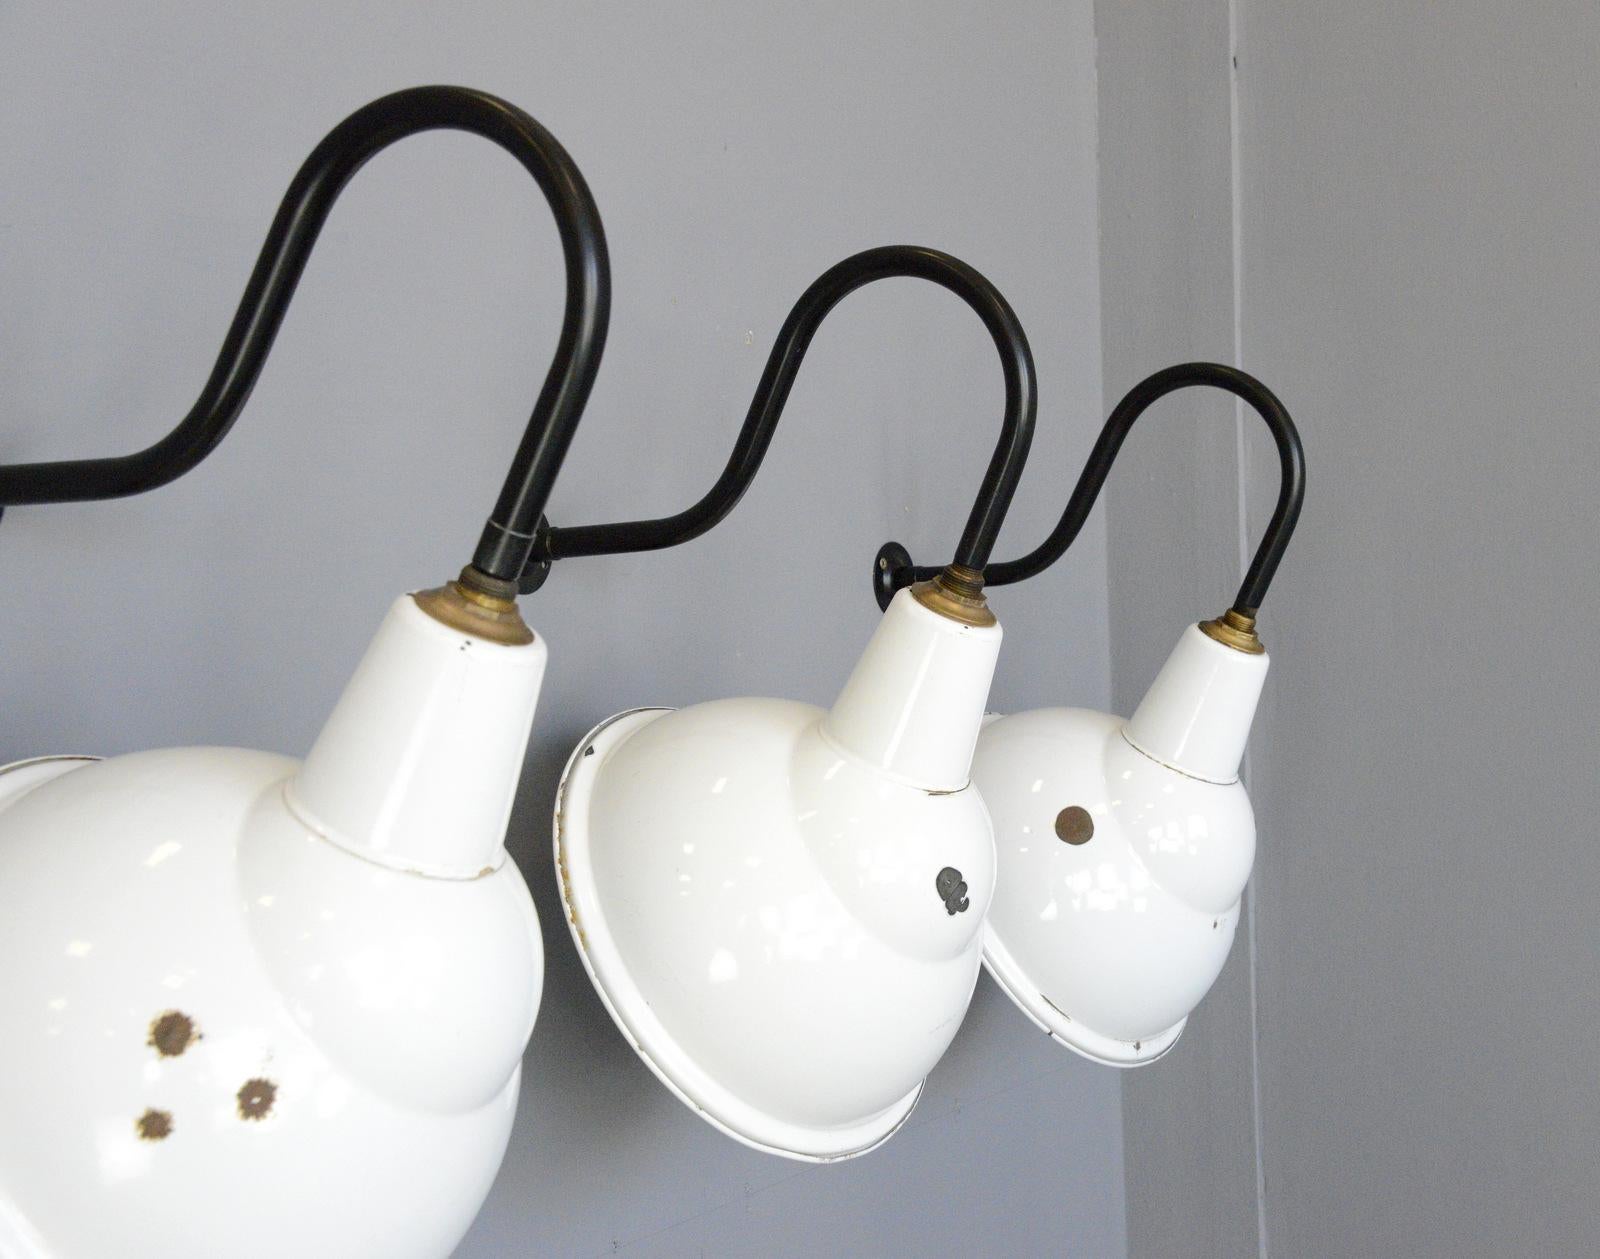 Industrial angled wall lights by Benjamin, circa 1950s

- Vitreous white enamel 
- Curved steel wall brackets
- Takes E27 fitting bulbs
- Wires directly into the wall
- Made by Benjamin
- English, 1950s
- Measures: 33cm wide x 43cm tall x